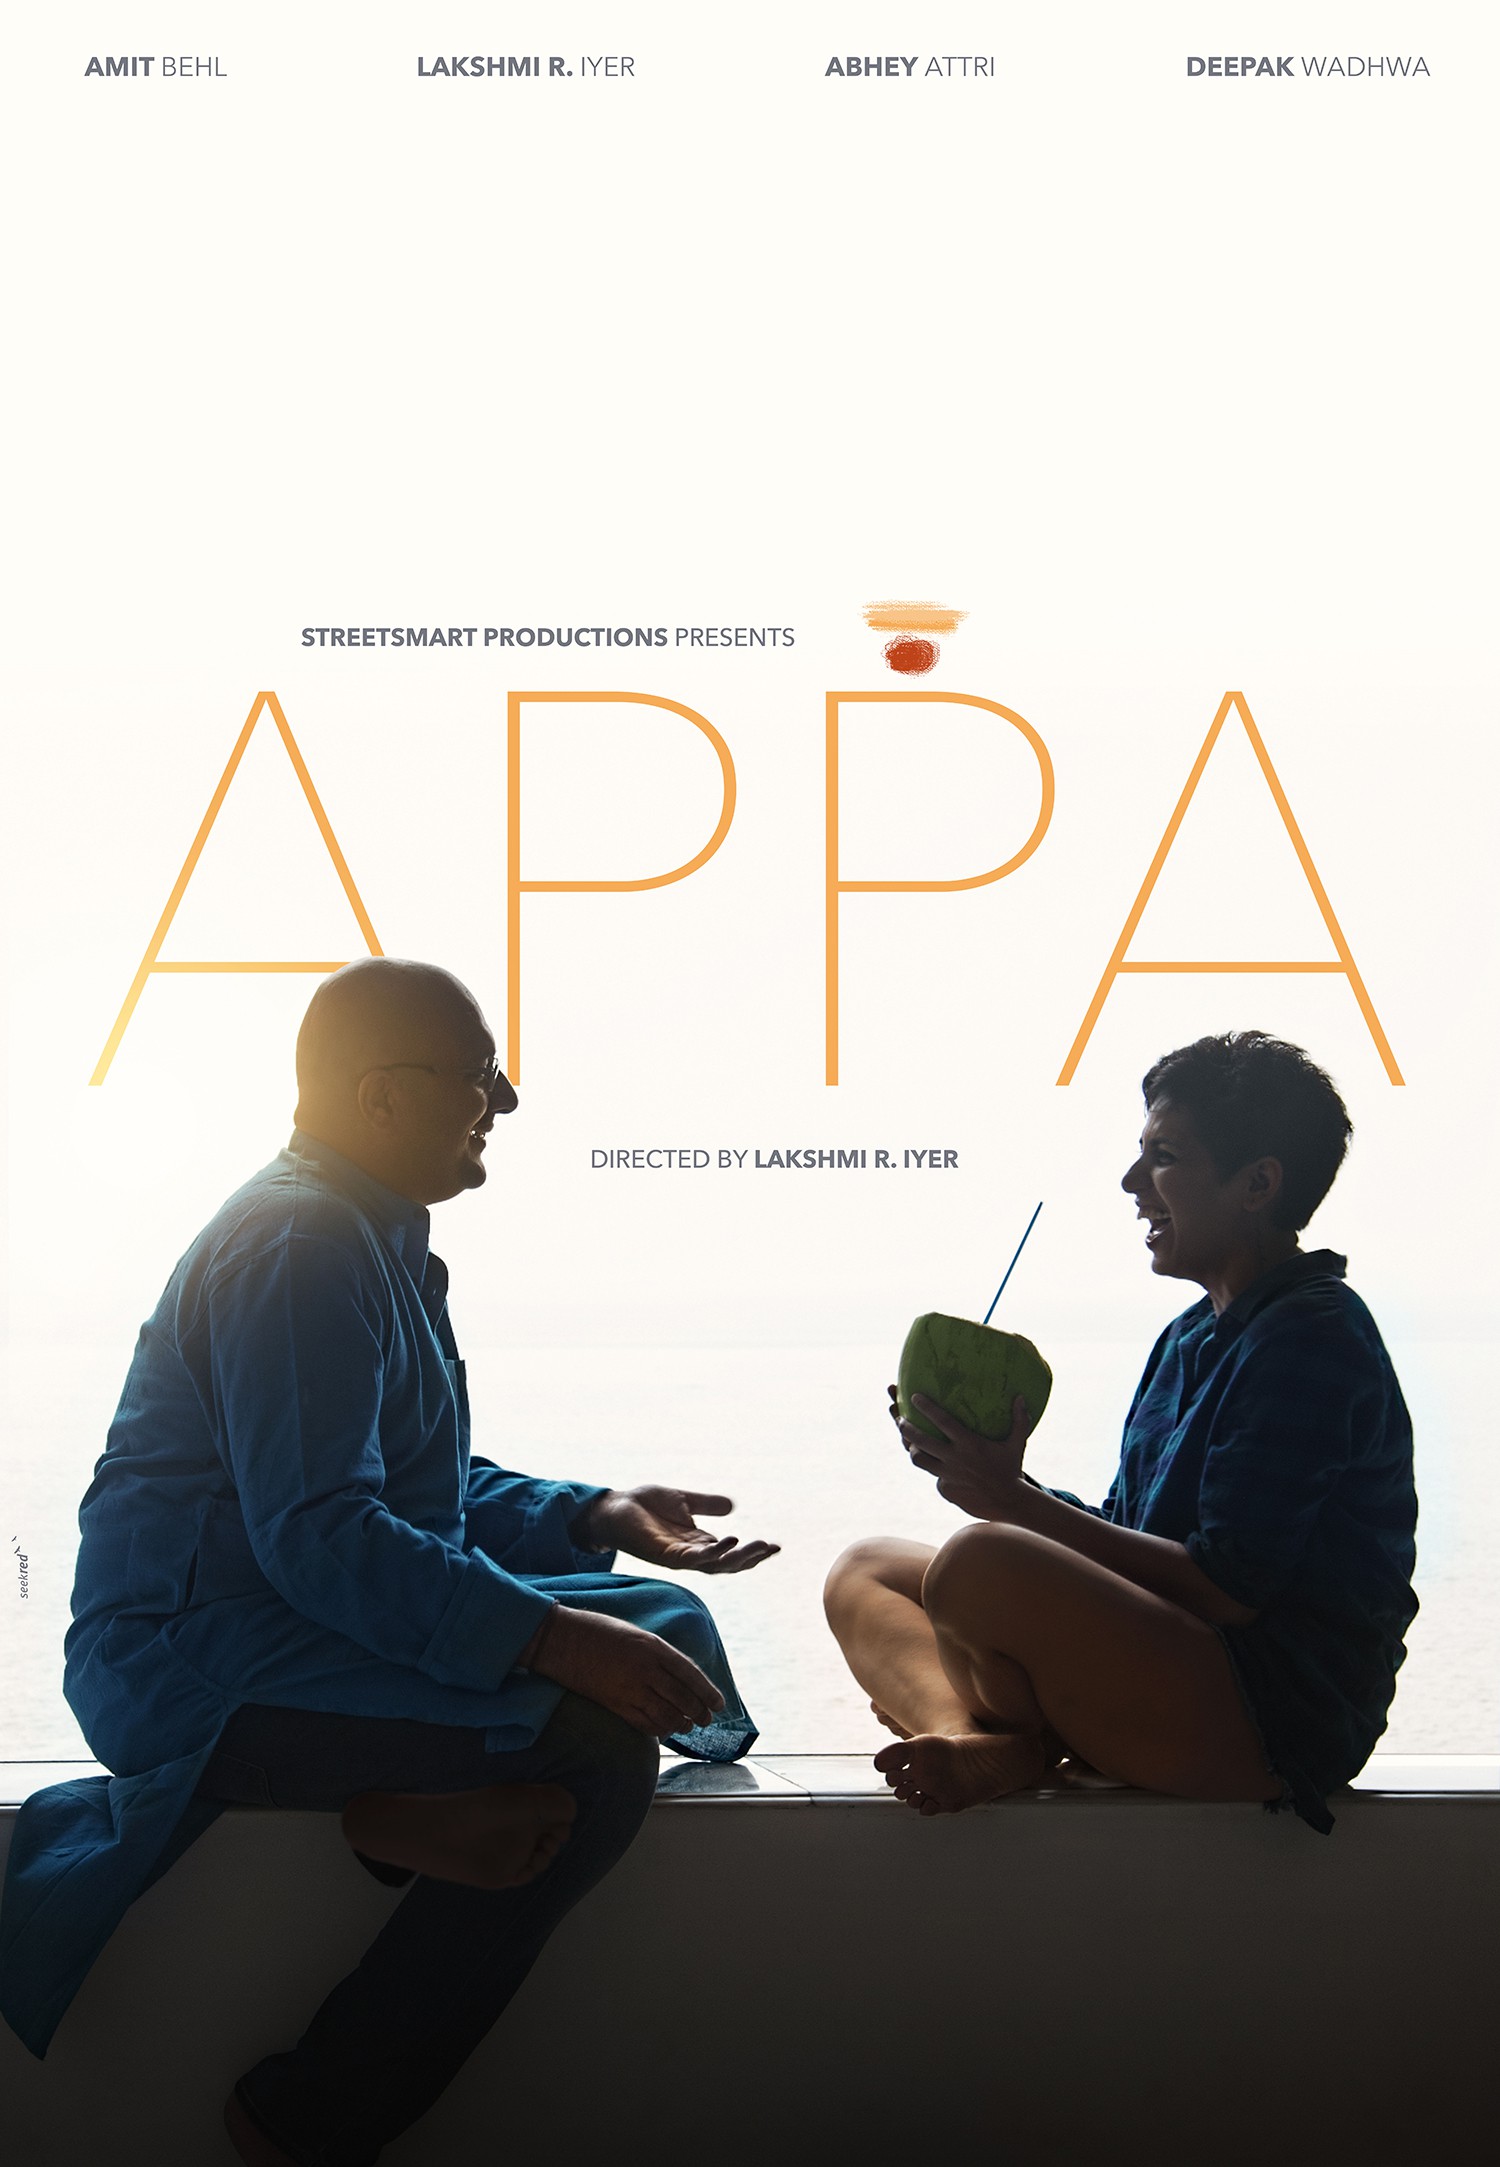 Mega Sized Movie Poster Image for Appa